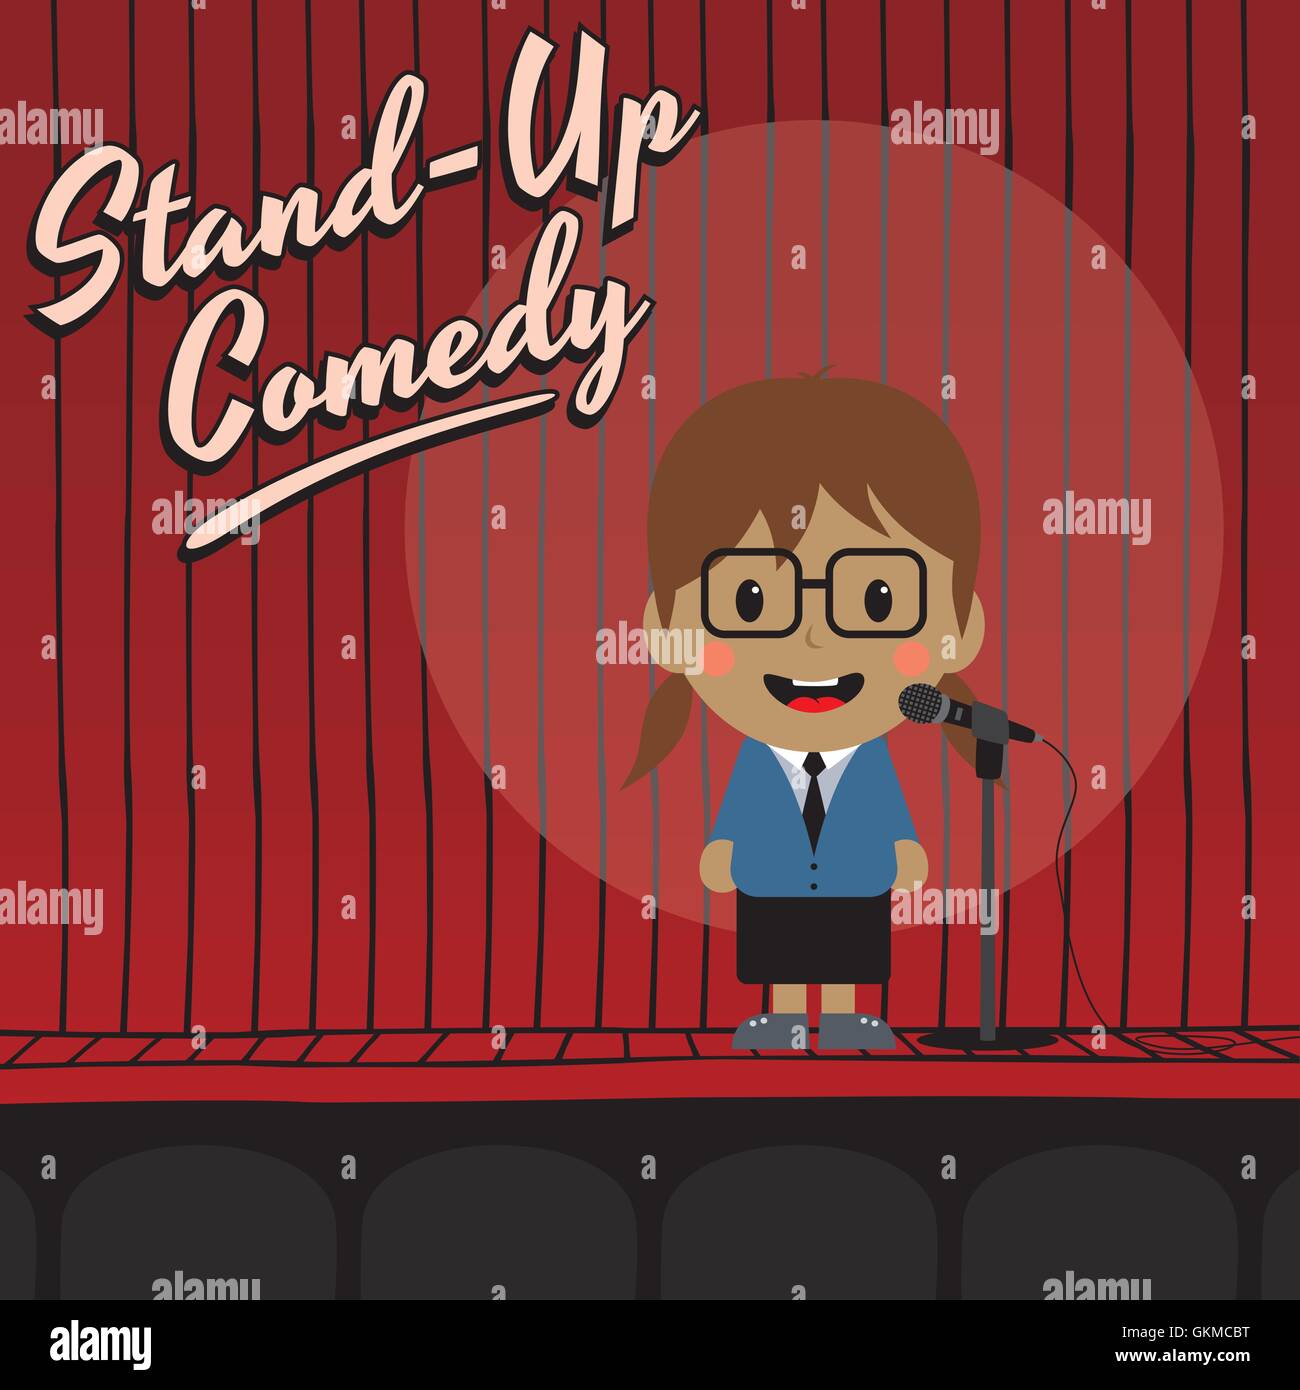 female stand up comedian cartoon character Stock Vector